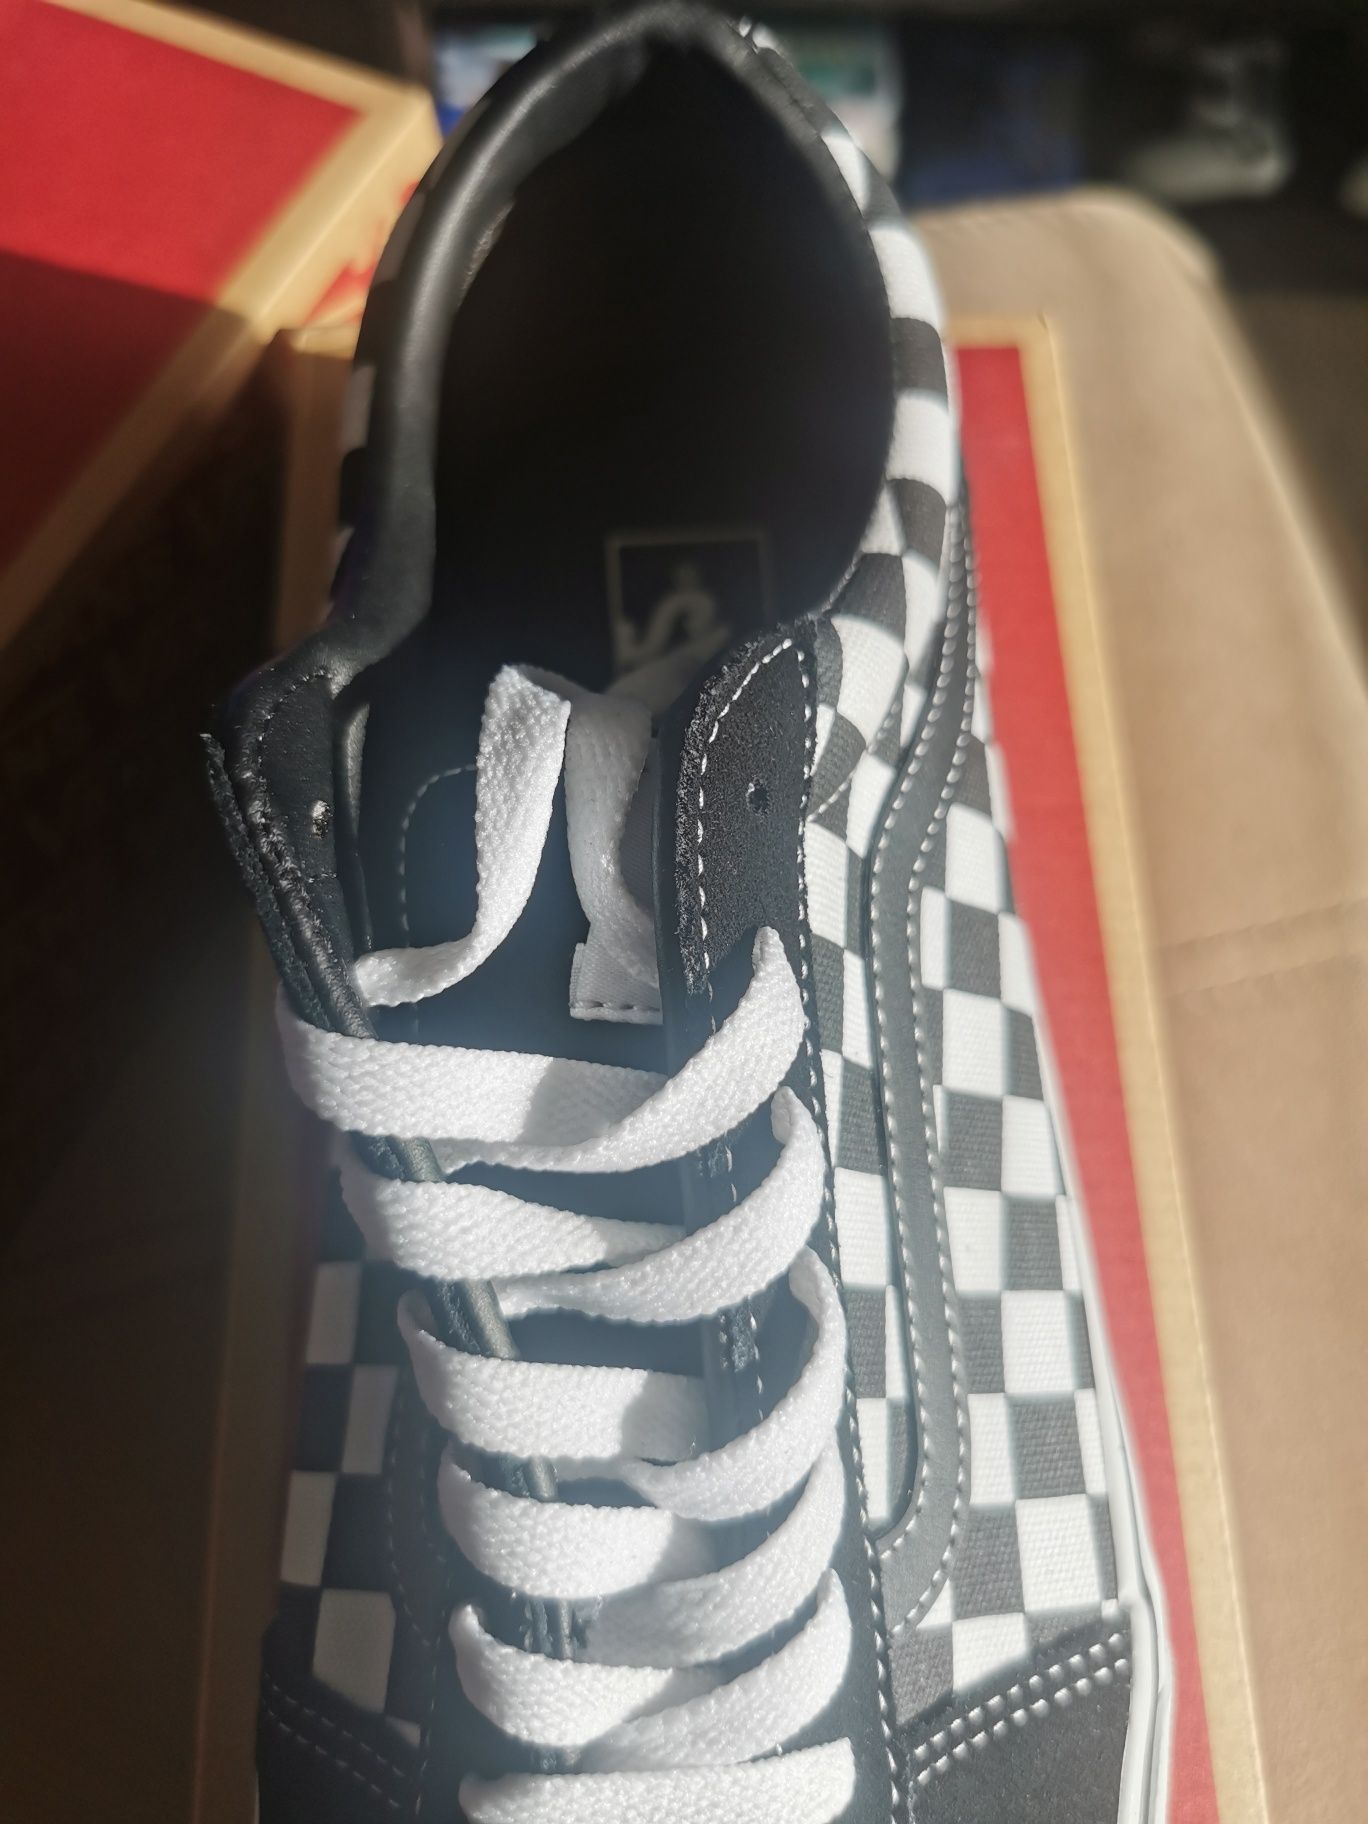 Vans Ward Chechered Trainers Chk Blk/Wht.